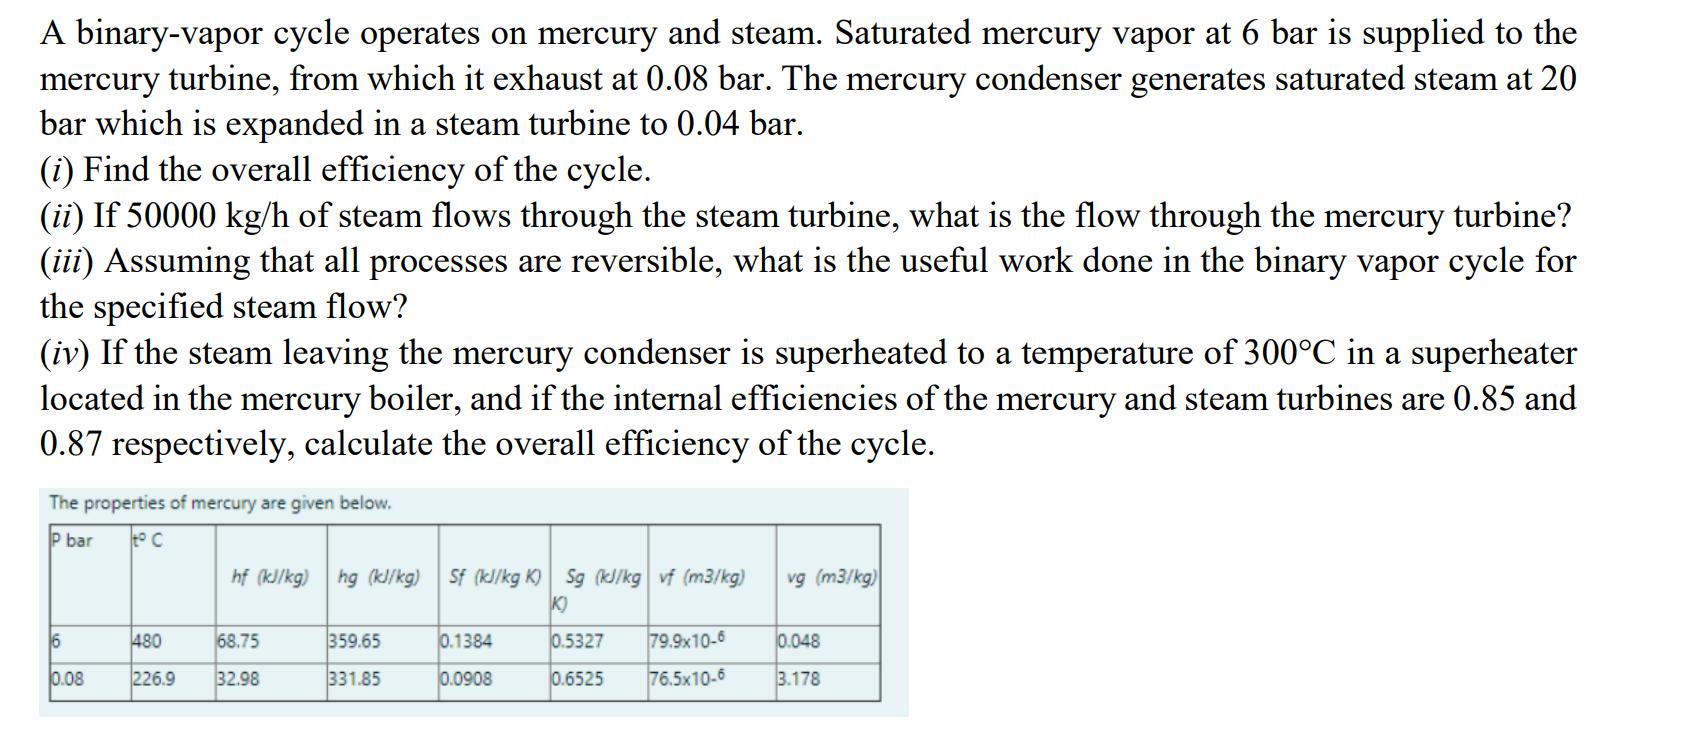 A binary-vapor cycle operates on mercury and steam. Saturated mercury vapor at 6 bar is supplied to the